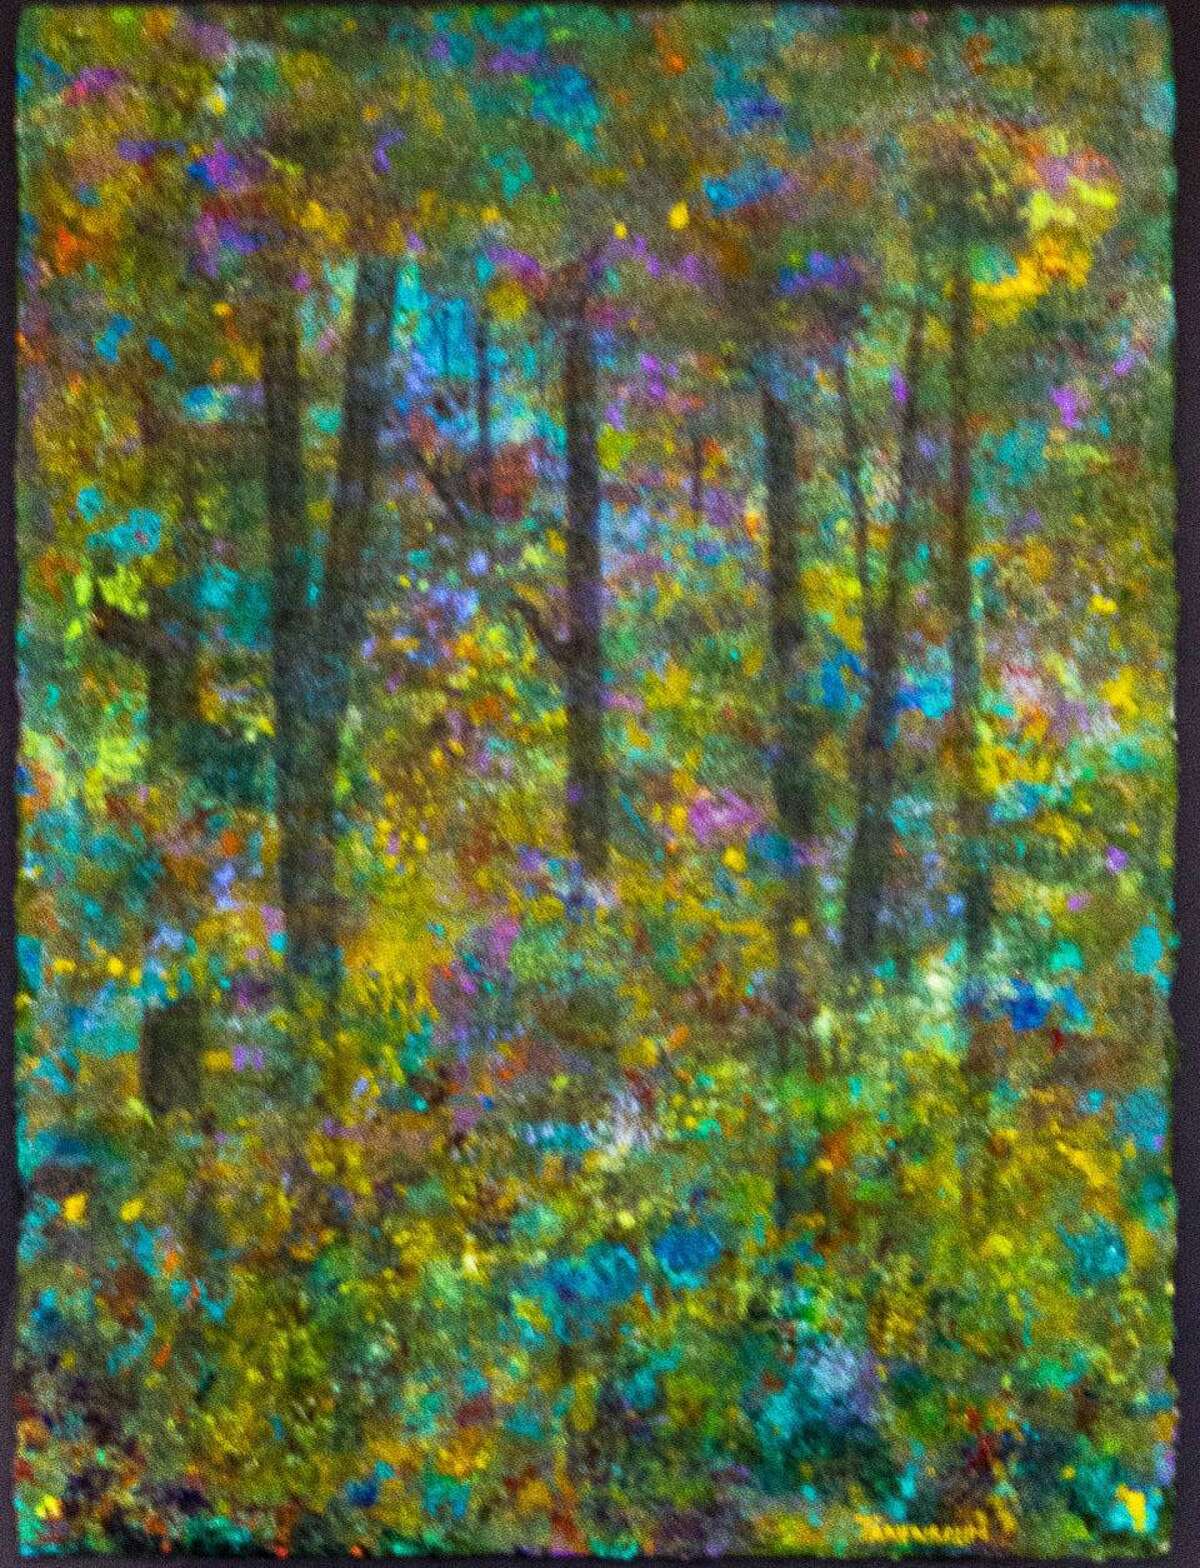 Spectrum/ The Kent Art Association has announced the winners of its 96th annual Members Show, which is open Thursdays through Sundays from 1 to 5 p.m. through March 17 at the 21 South Main St. gallery. Steven Tanenbaum of New Milford was presented an Award of Excellence for her acrylic “Enchanted Forest.” Feb. 2019 Courtesy of Kent Art Association